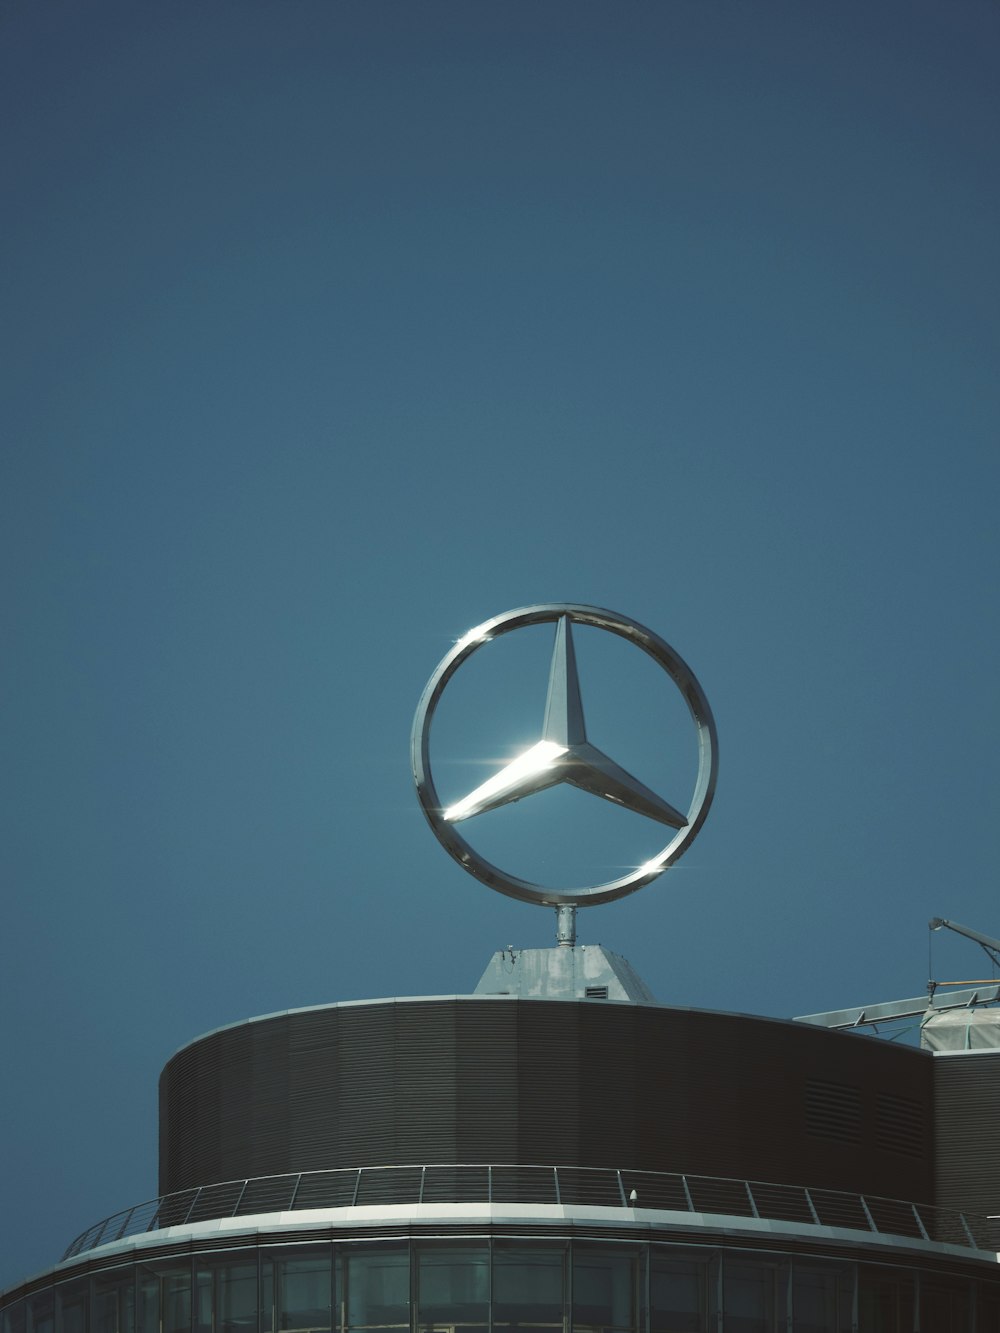 a mercedes logo on top of a building